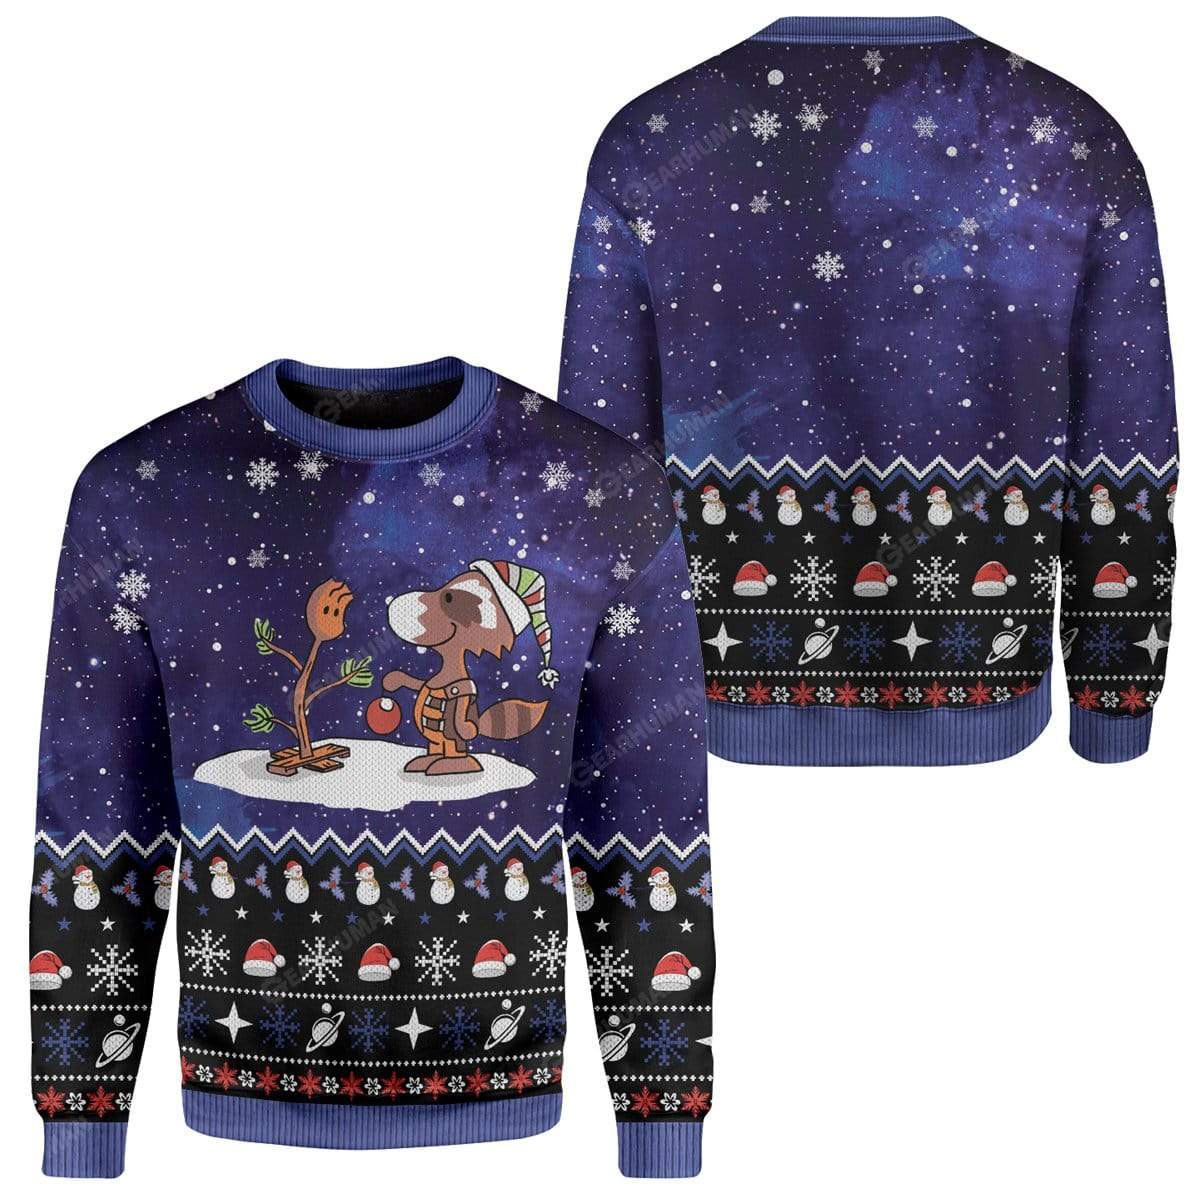 Ugly Christmas In Galaxy Sweater Apparel MV-TA2811191 Ugly Christmas Sweater 